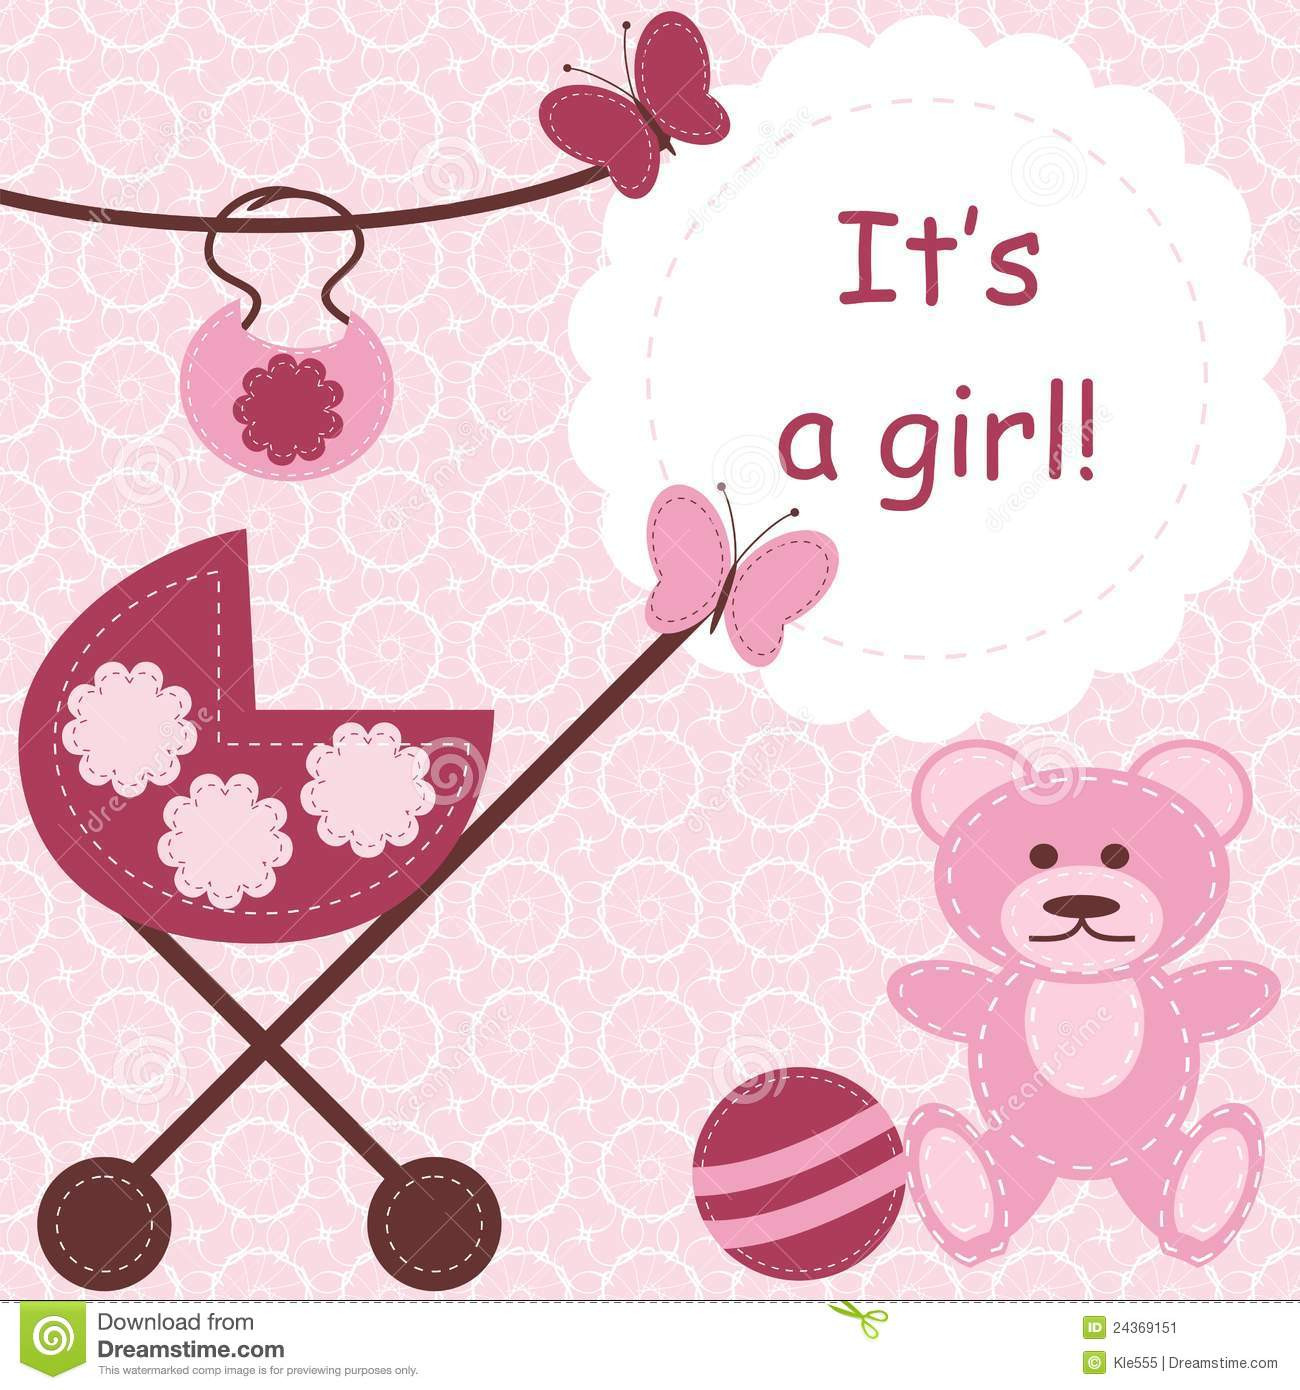 Newborn Baby Wishes Quotes
 Newborn Baby Girl Wishes Quotes QuotesGram